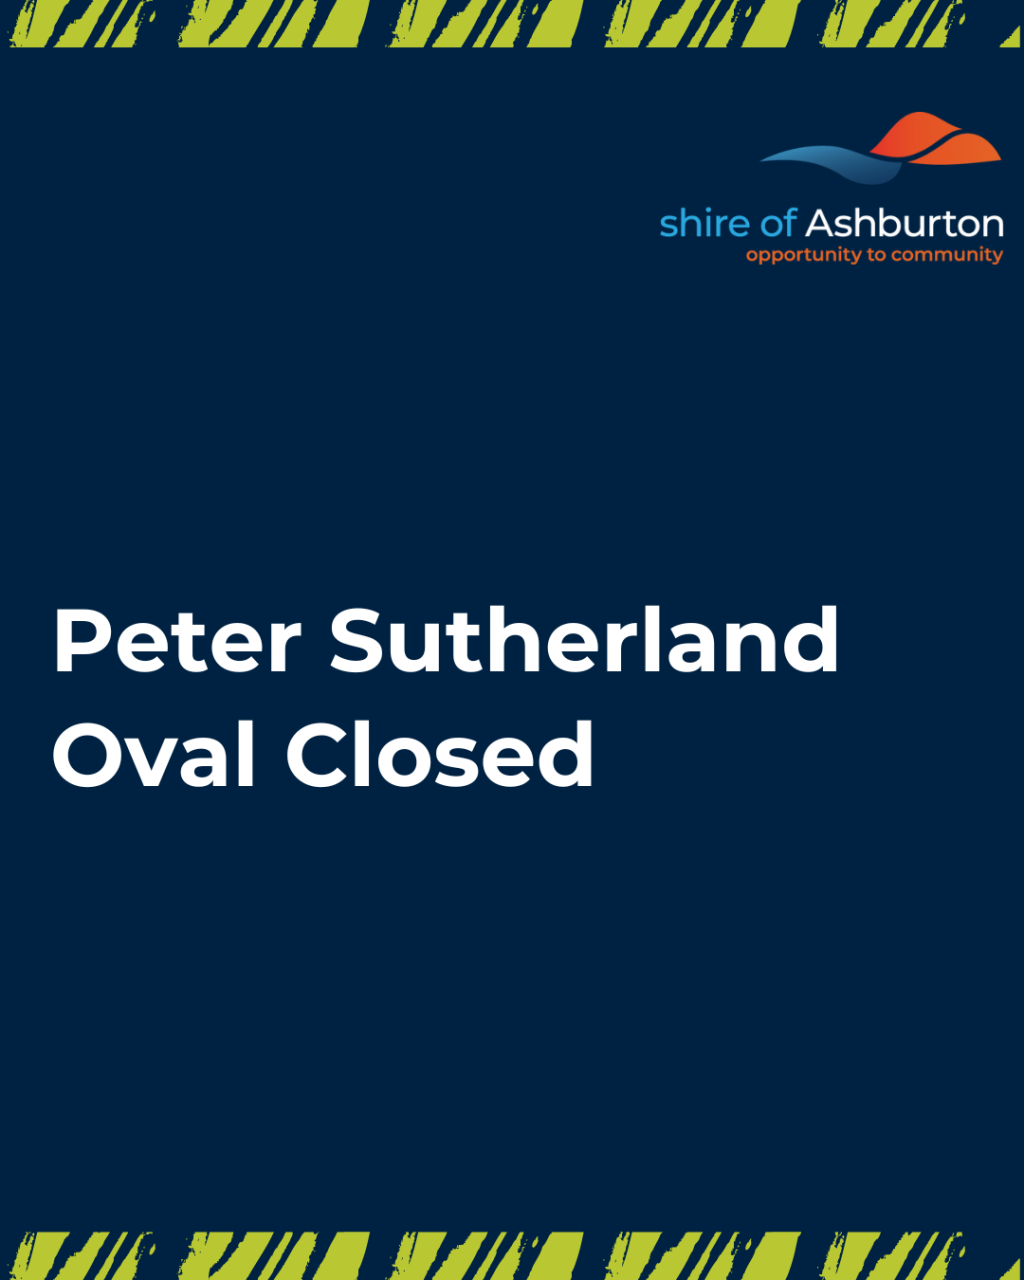 Peter Sutherland Oval closed